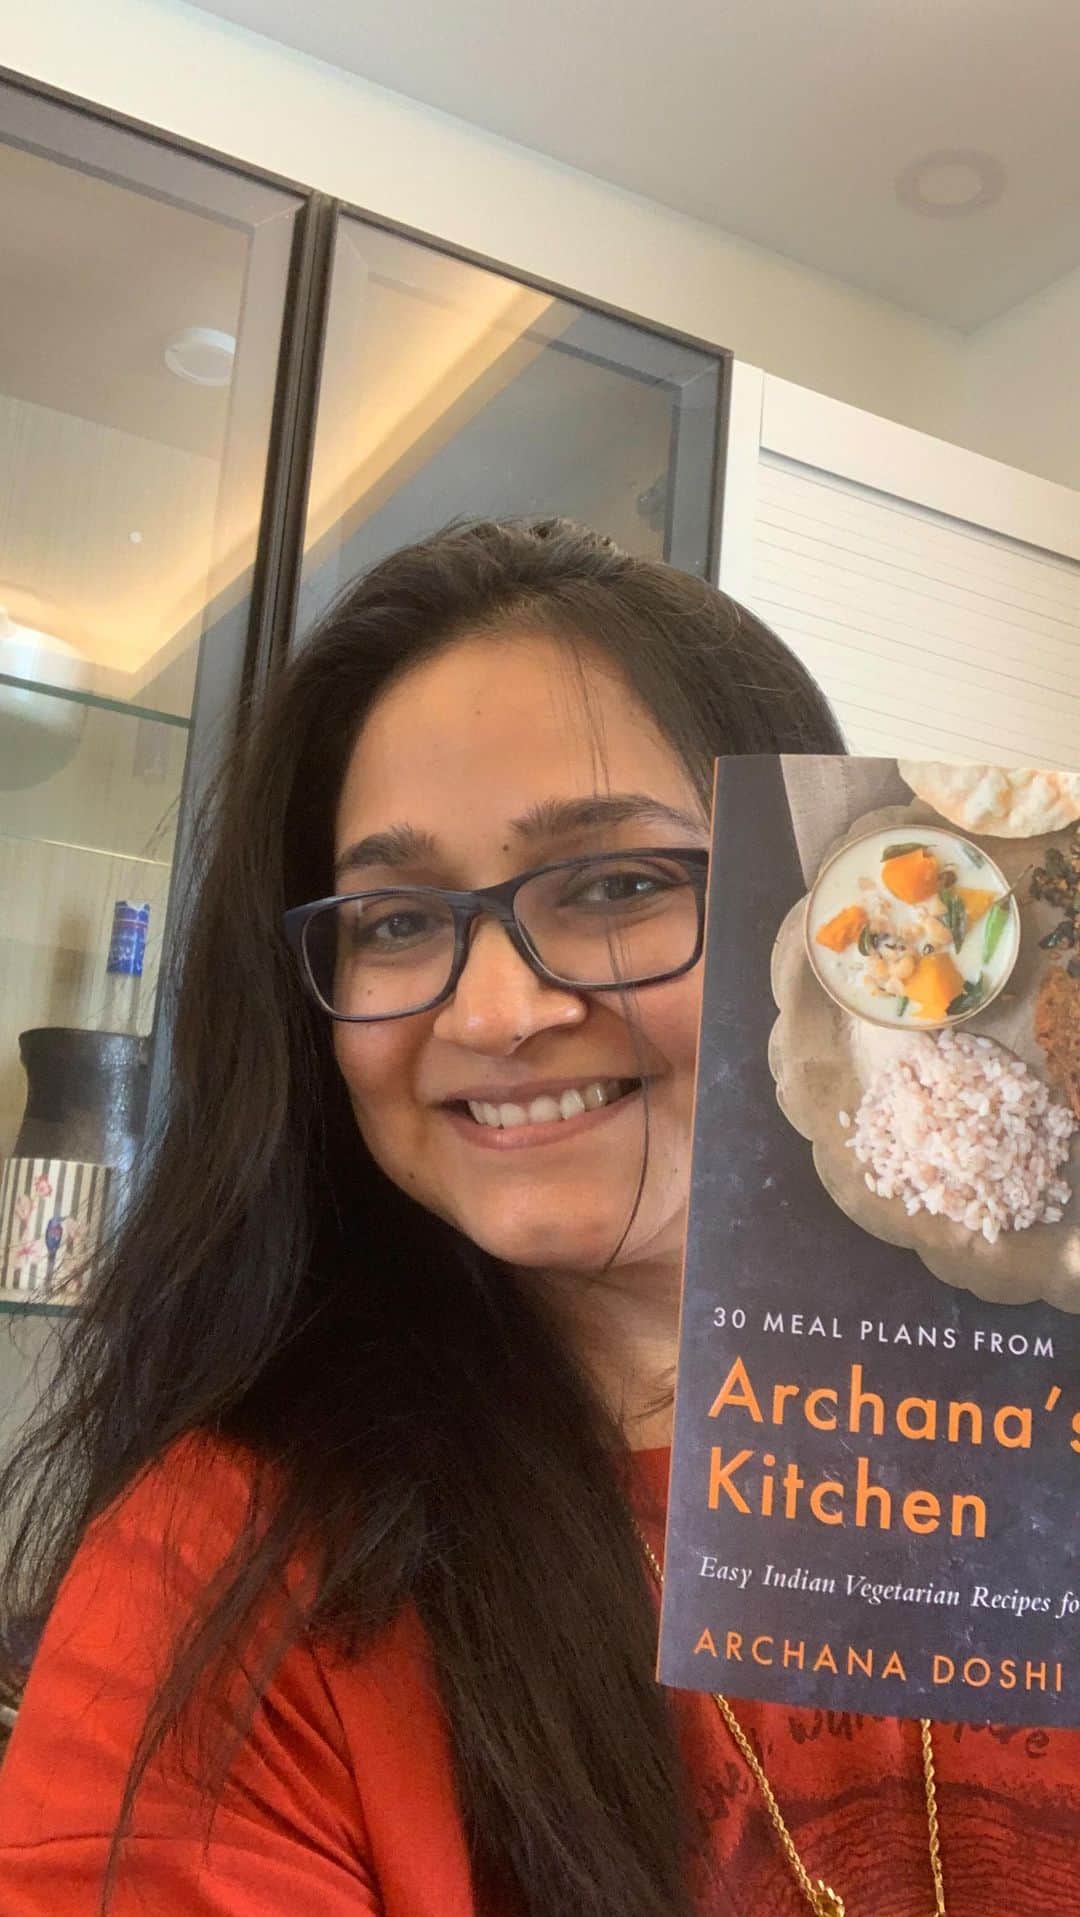 Archana's Kitchenのインスタグラム：「Super excited to share the launch of my first cookbook - ✨30 Meal Plans From Archanas Kitchen ✨  It’s available on Amazon and across all bookstores in india. And a kindle version too. Hope you find this book of meal planning useful and becomes a bible at home for everyday cooking ideas.   Do share the book with friends and family and gift it too them too. ❤️  Thanks hina @funfoodandfrolic for launching the book live with me. It truly means a lot ❤️🙏🏻.   The link is there in my bio to shop the book @archanaskitchen   #bookstagram #book #cookbook #bookme #recipes #mealprep #mealplan #foodcoma #archanaskitchen #portioncontrol」